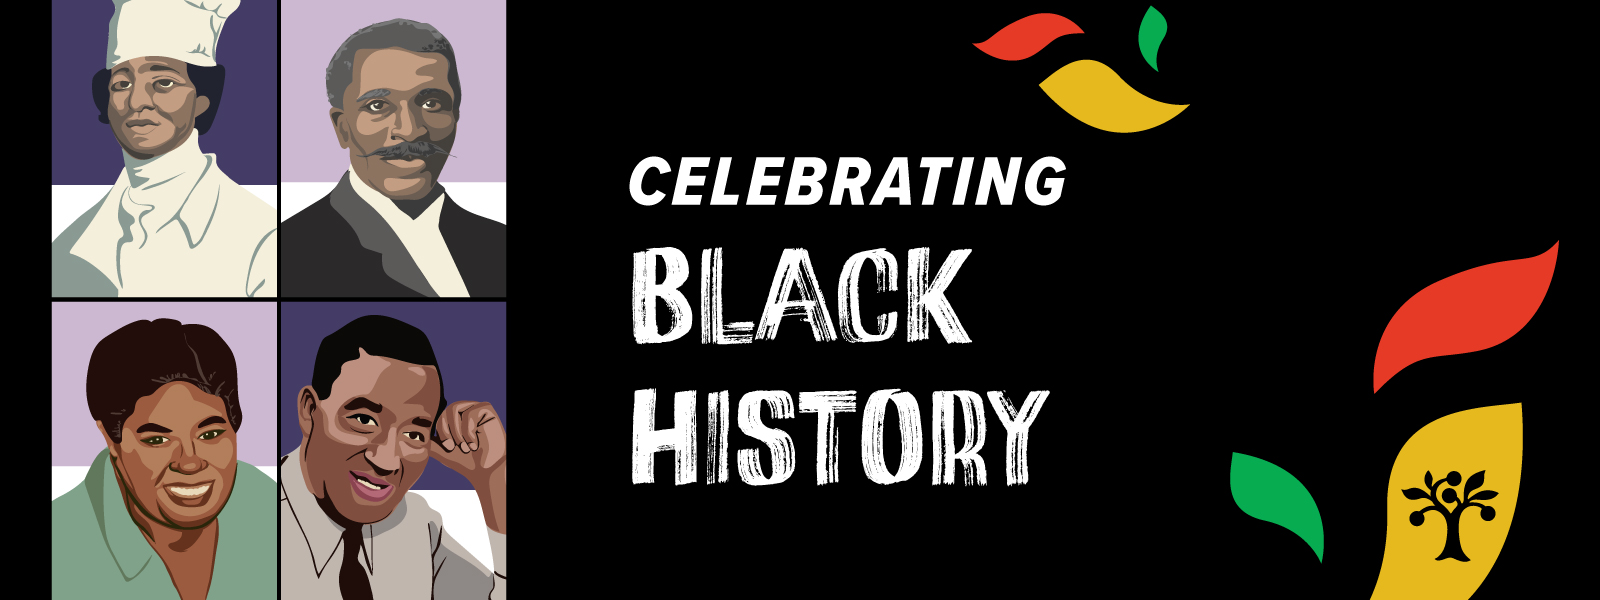 Four illustrations of significant Black figures in food history with text reading "Celebrating Black History"